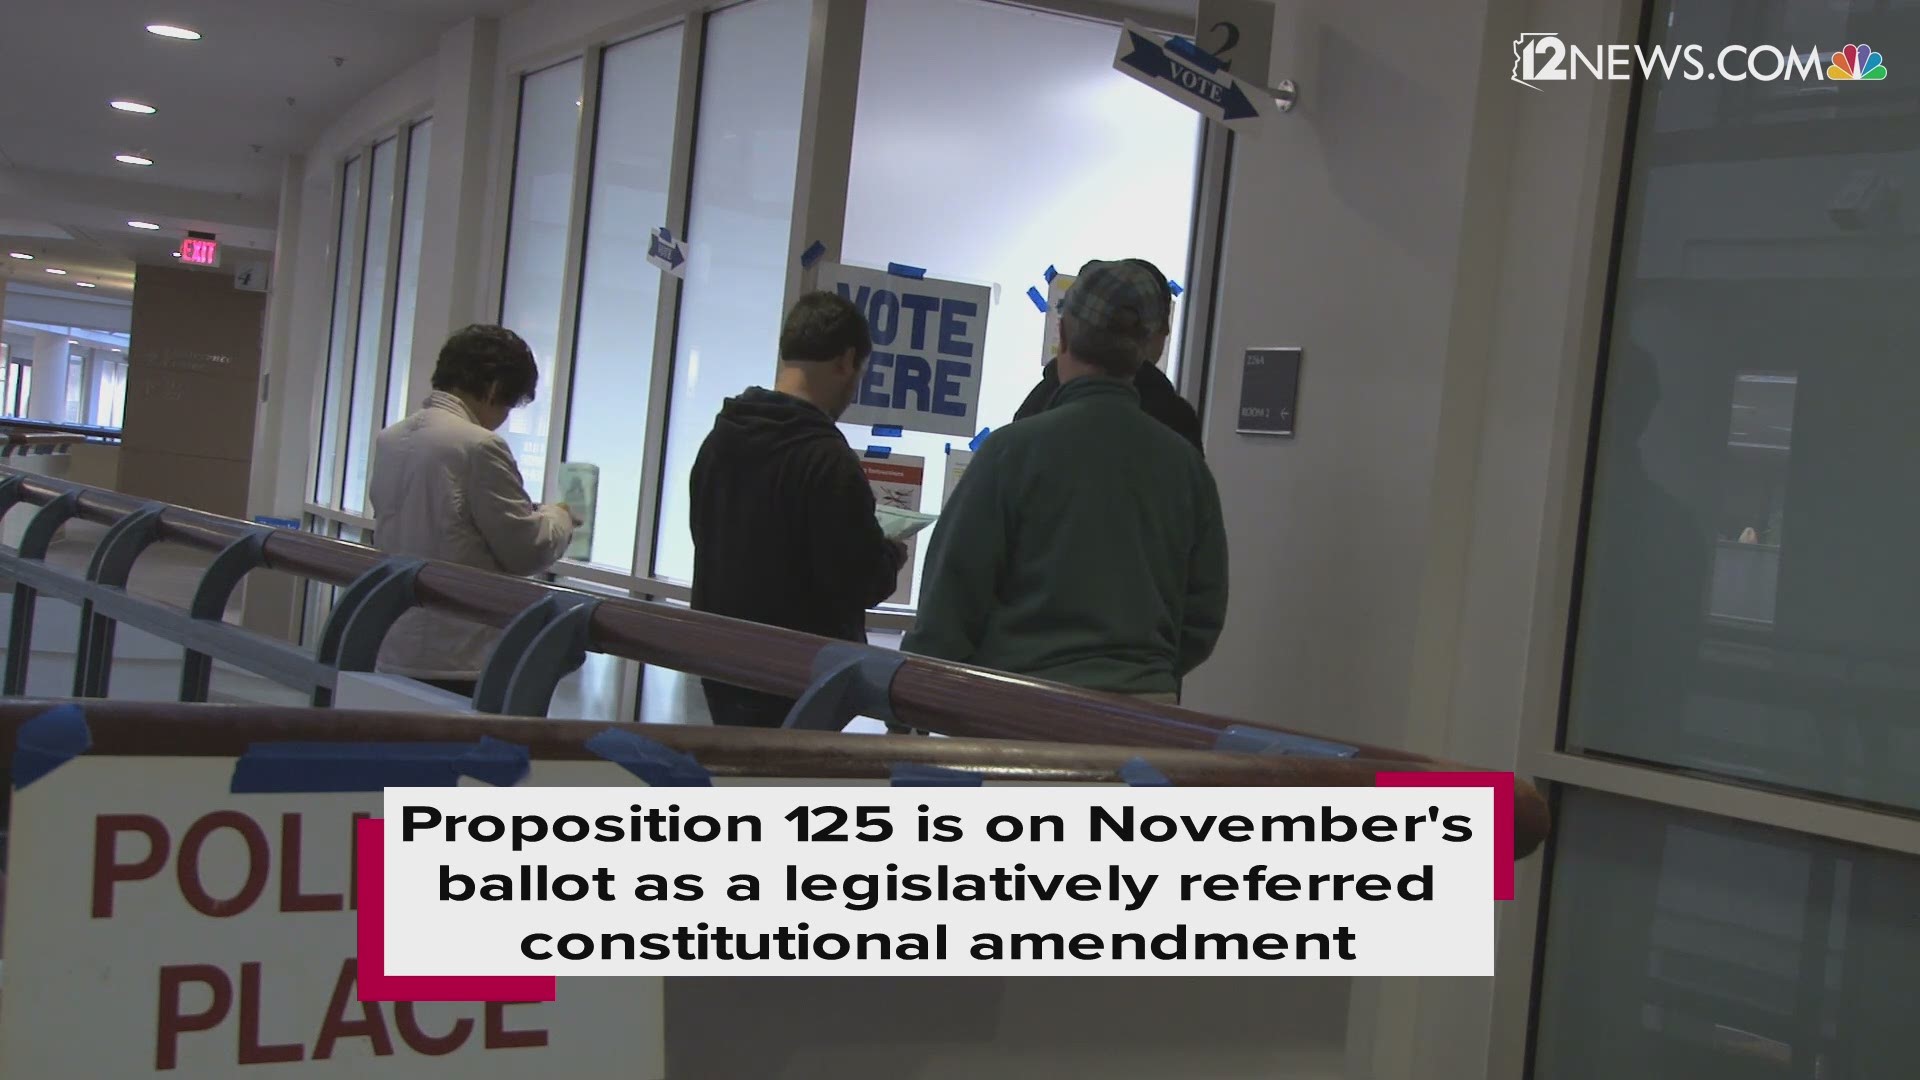 Prop 125 is the next step of Prop 124, which passed in Arizona during the 2016 election. It would make adjustment to the pension plans of corrections officers and elected officials.